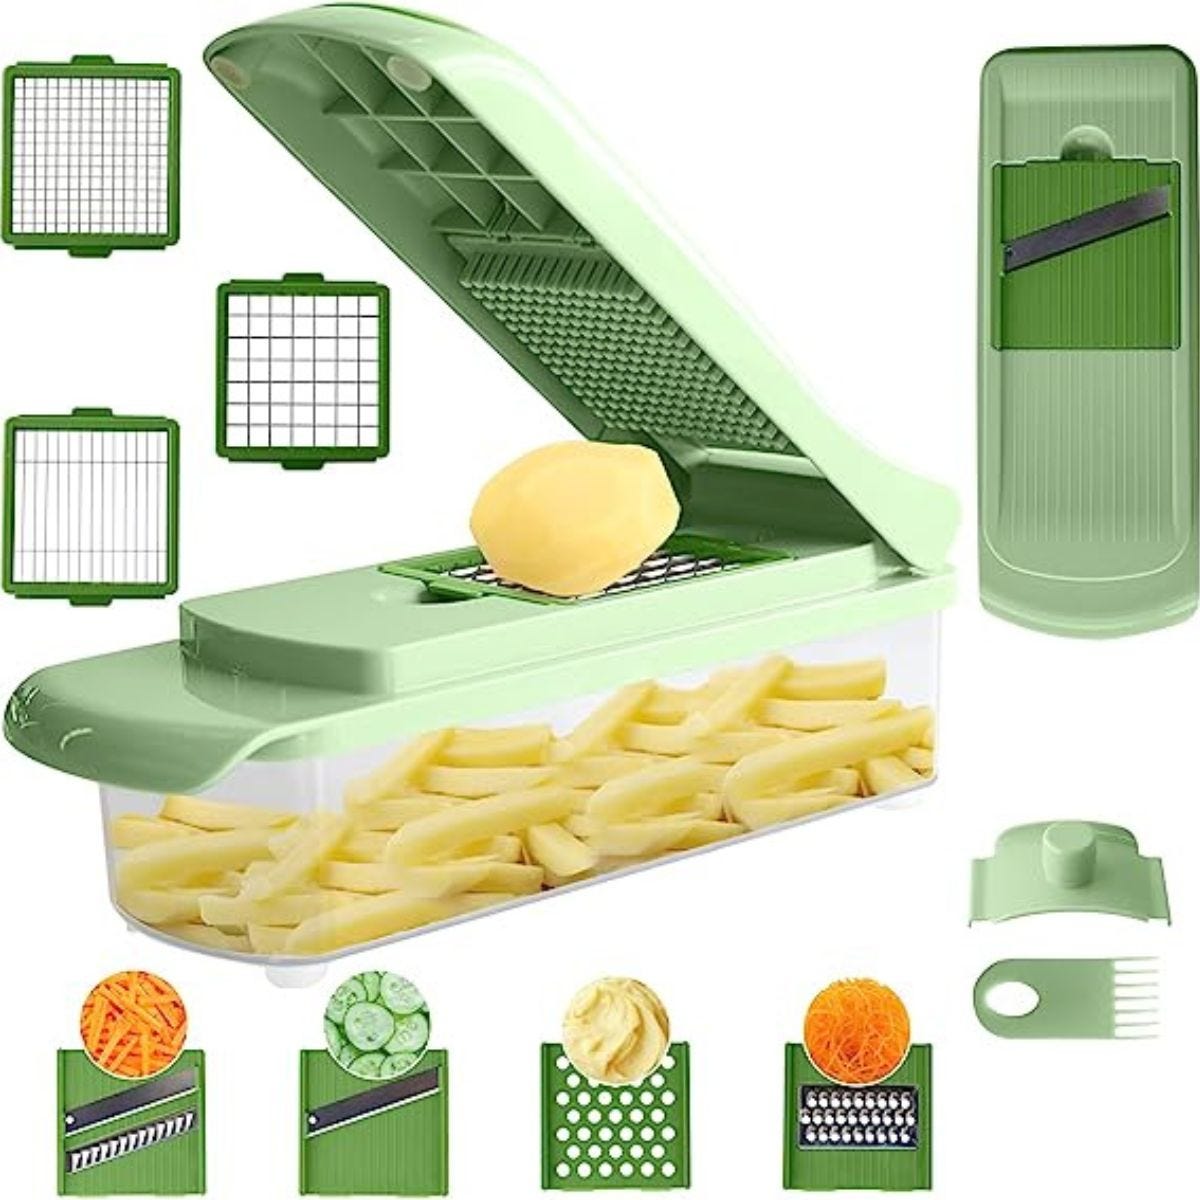 How to Use a Mandoline Slicer to Cut Vegetables, French Fries, and More